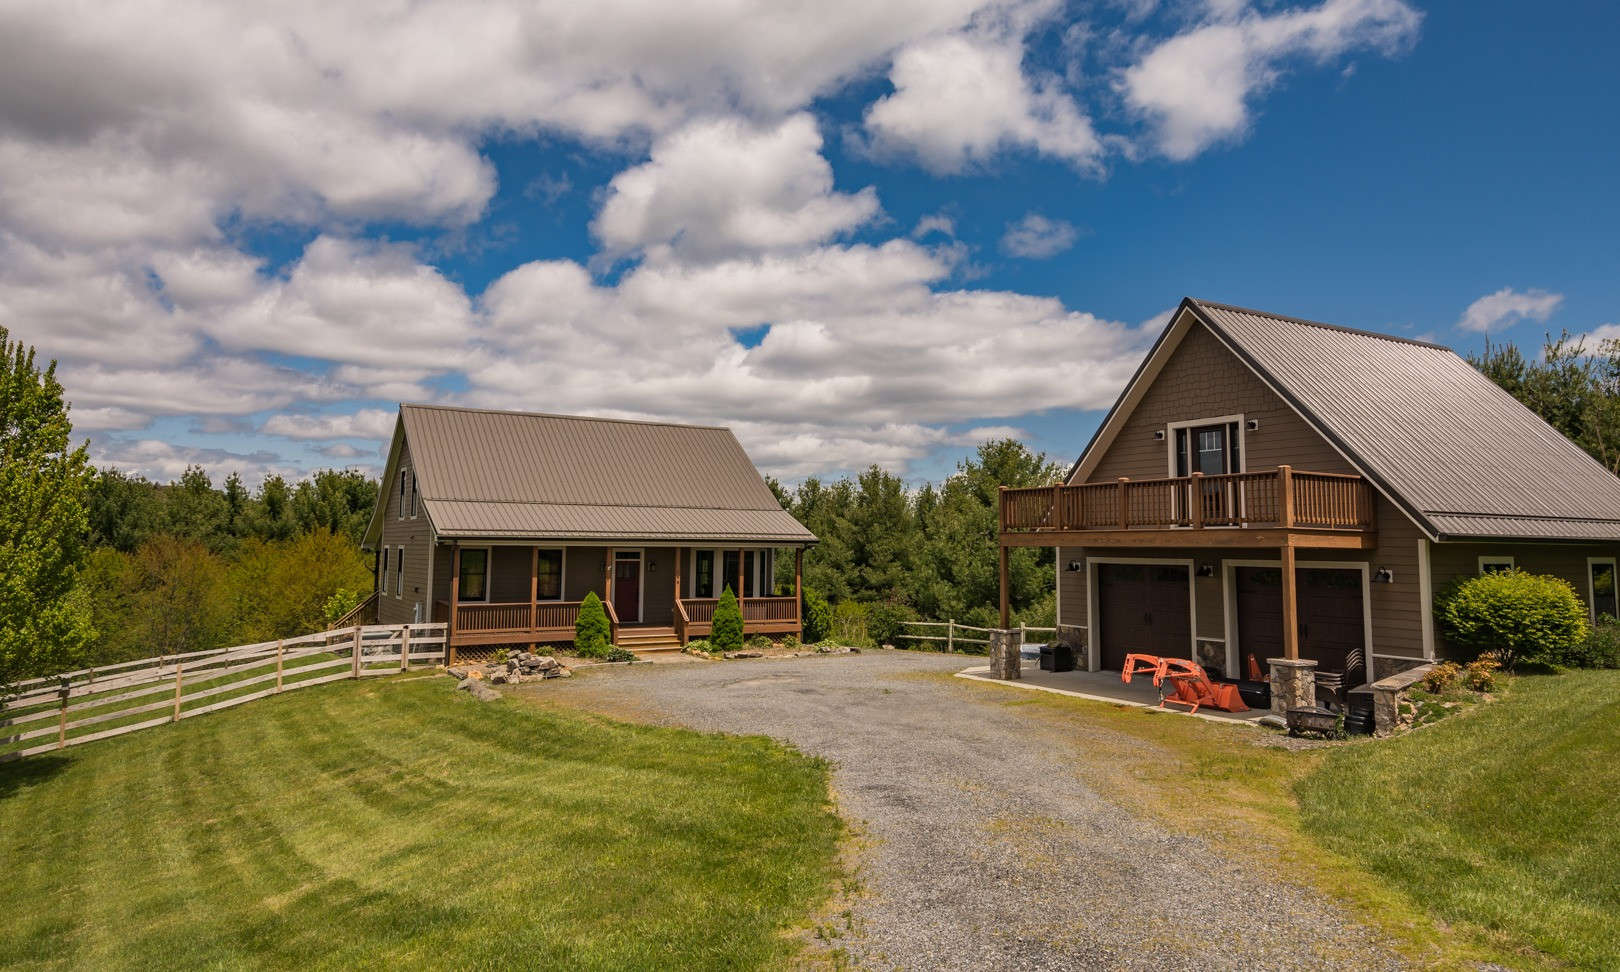 The Complete Log Cabin Package!  Enjoy privacy and long range layered views from this 3-bedroom, 3-bath Southern Ashe County home located in Green Meadows Estates, a well established community offering common New River Access.